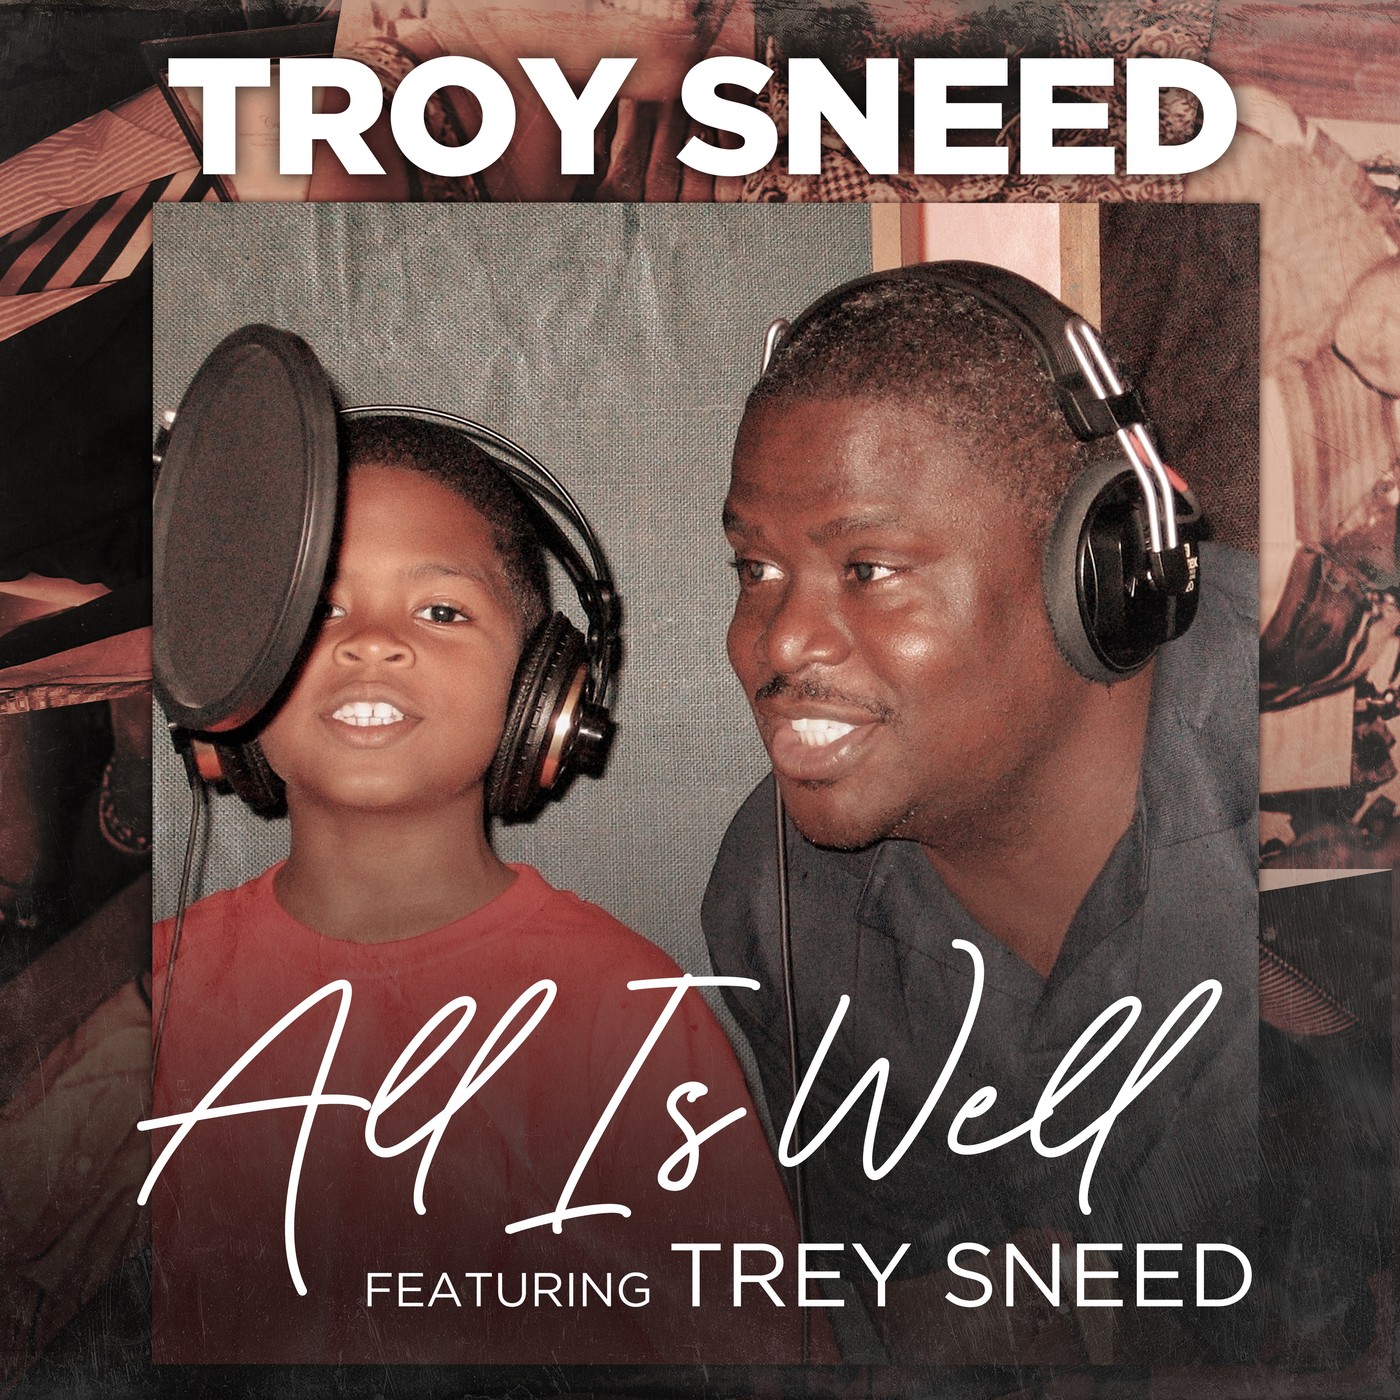 Art for All is Well by Troy Sneed feat. Trey Sneed